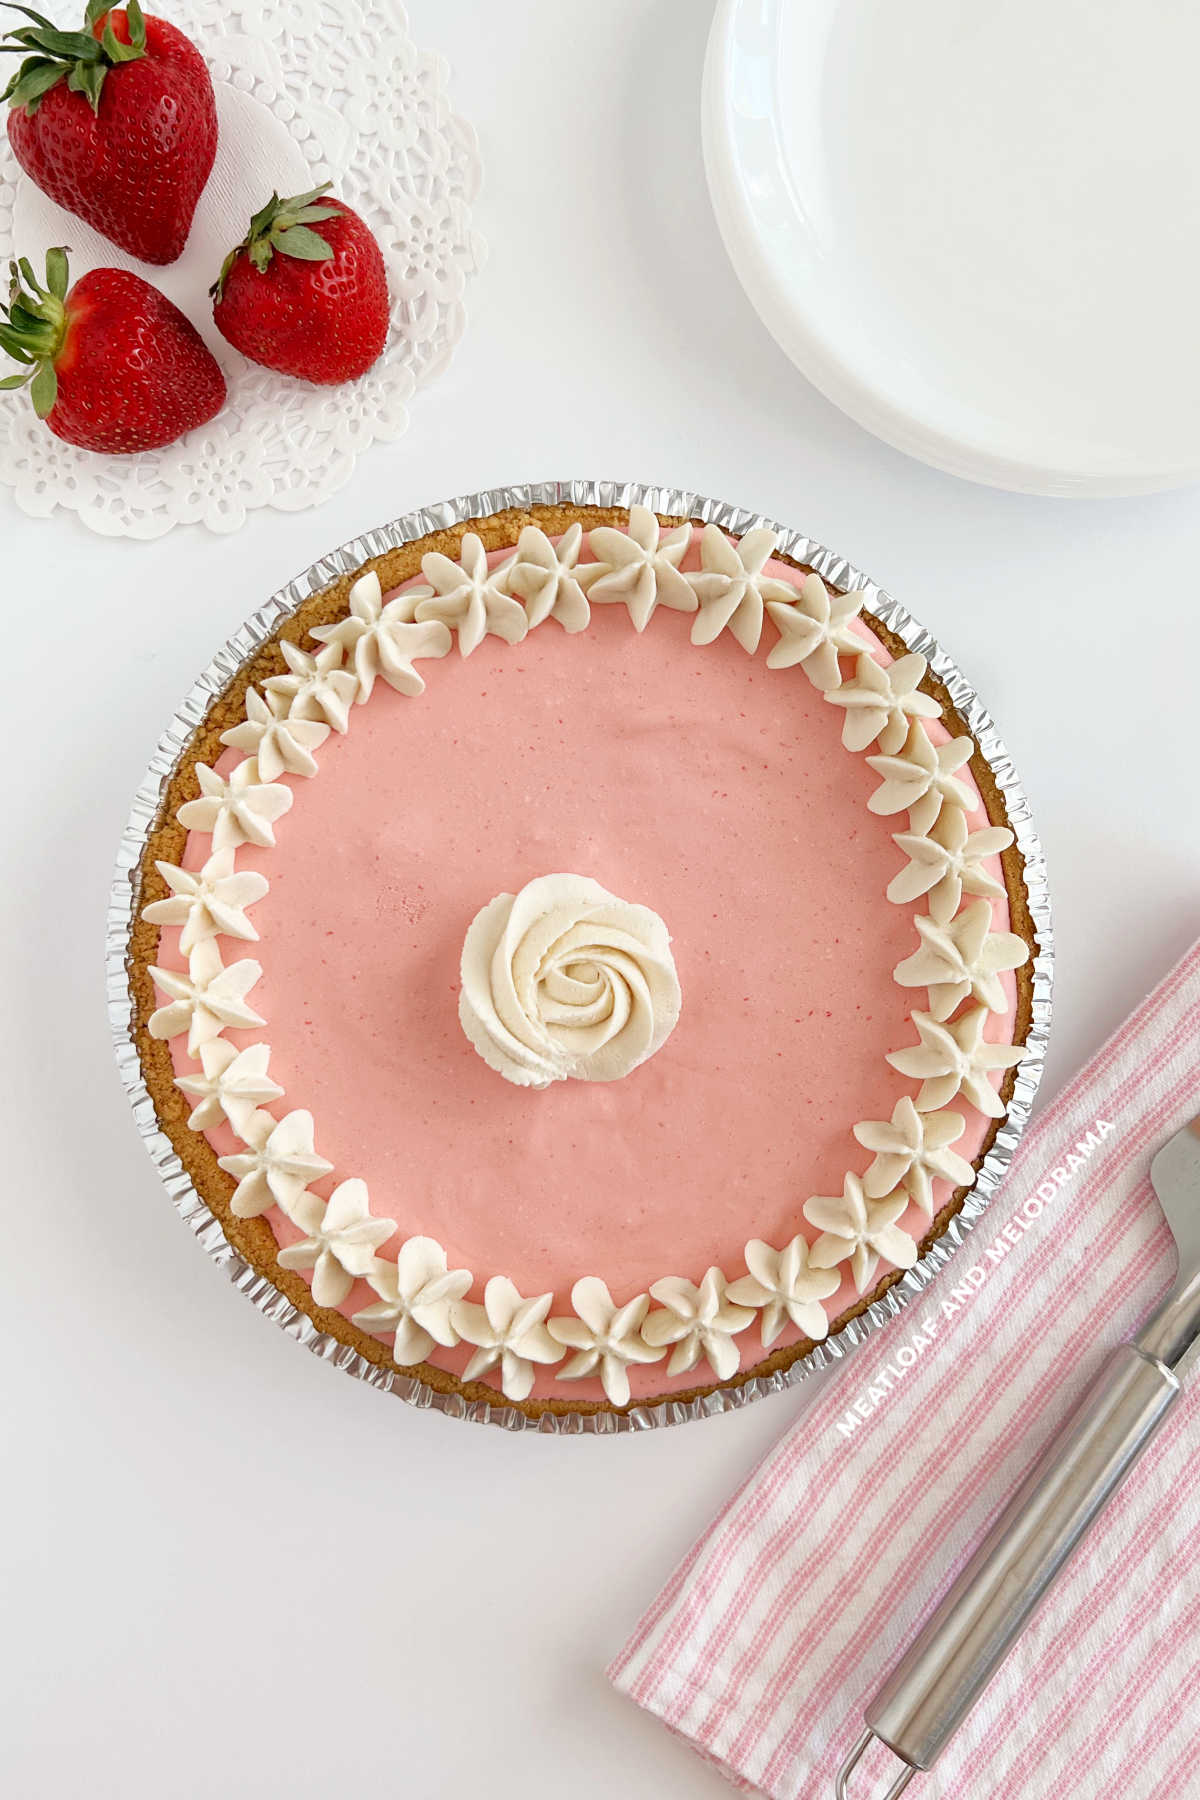 strawberry cool whip pie with strawberries and whipped cream rosette on table